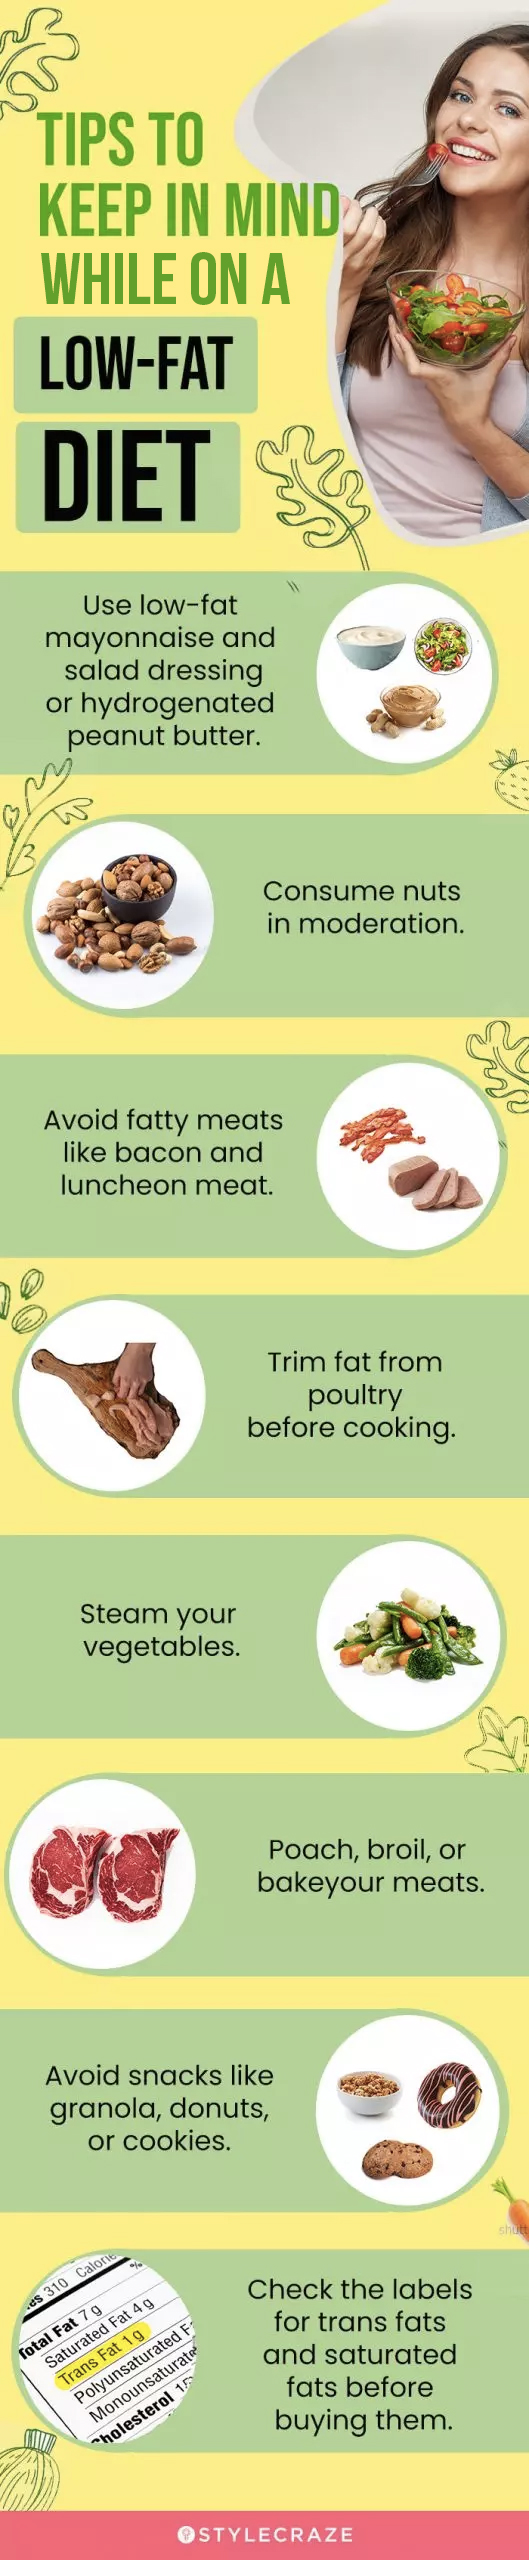 tips to keep in mind on a low fat diet (infographic)